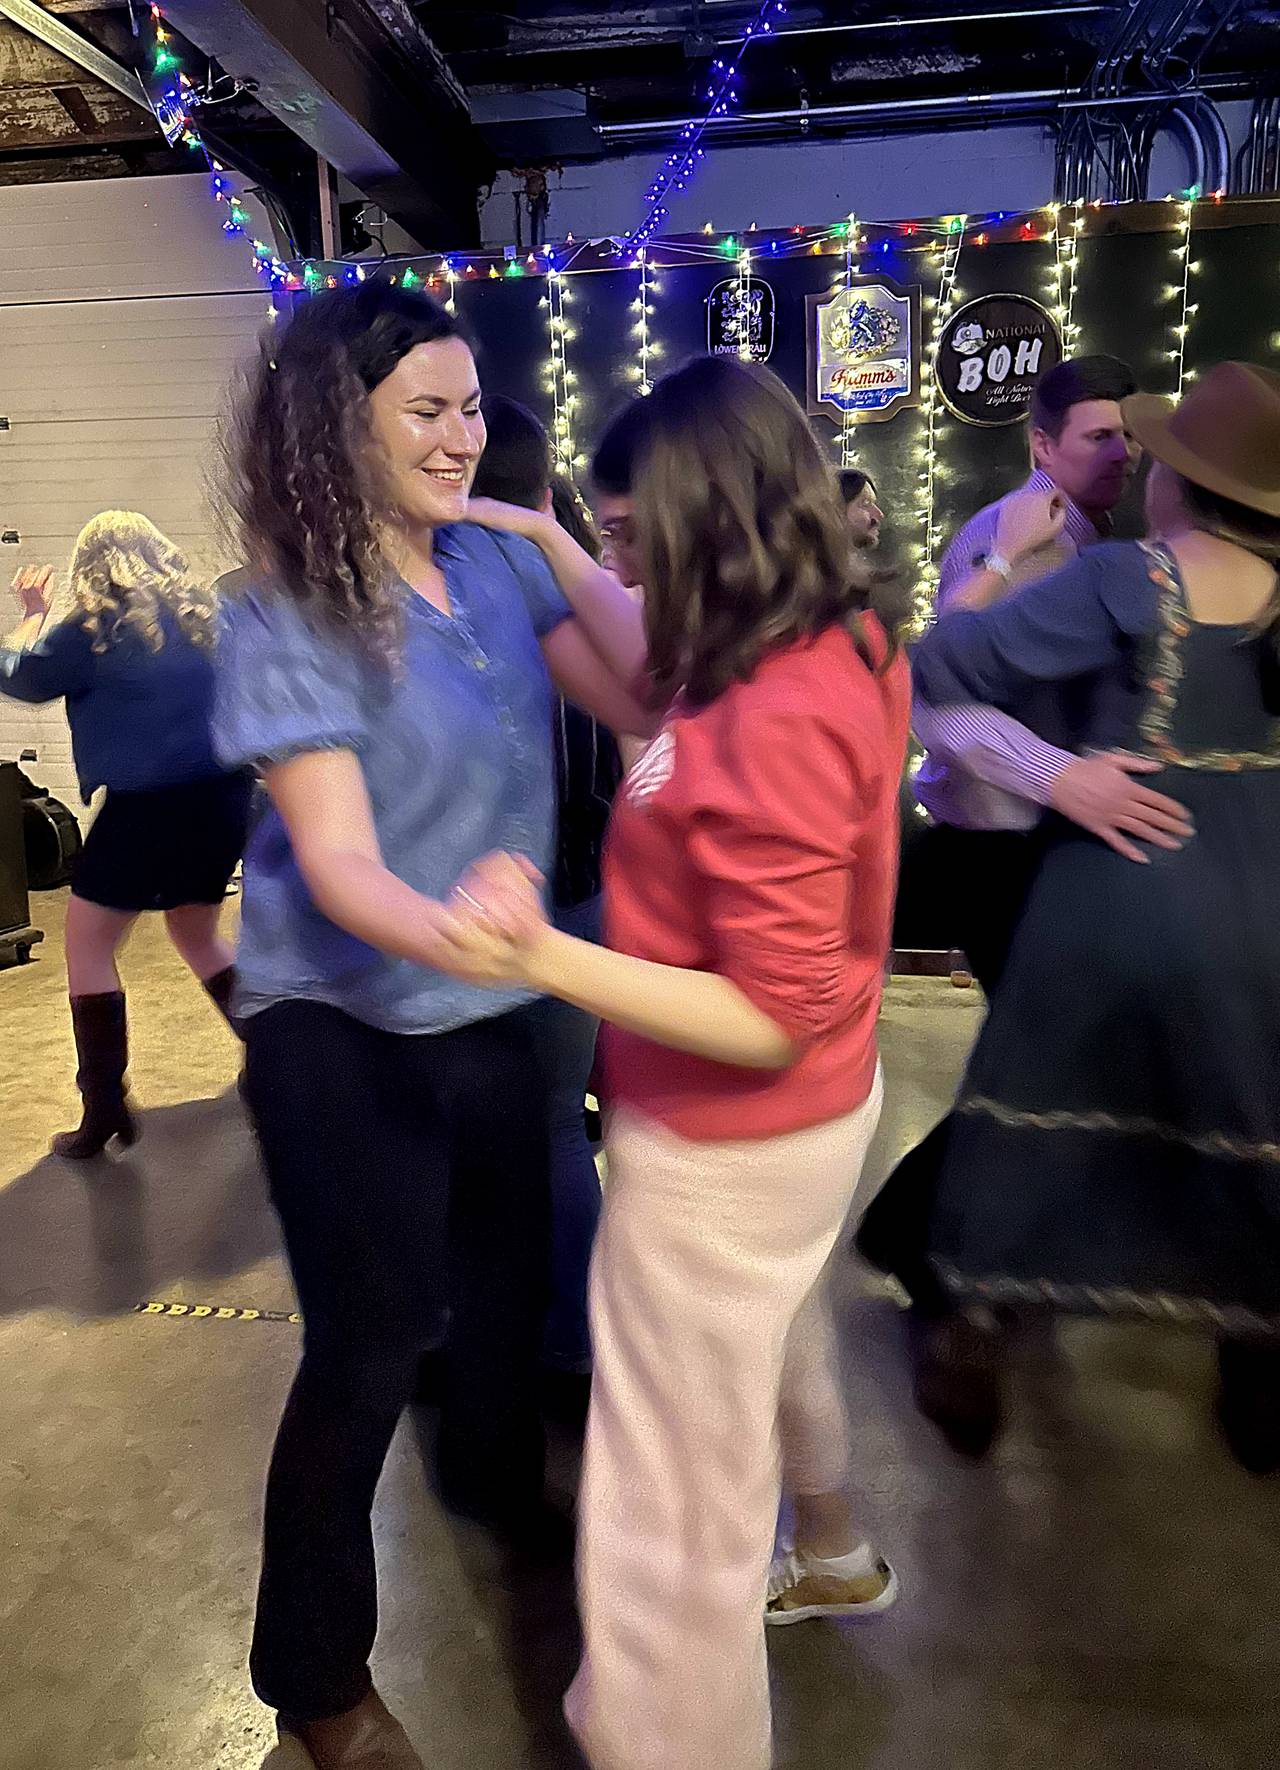 Dancing Honky Tonk (No. 19, lead) — Dancing with my roommate, Clara Longo de Freitas, at Waverly Brewing Co. on March 21, 2024. We were there for Honky Tonk, a two-stepping event that’s held monthly.